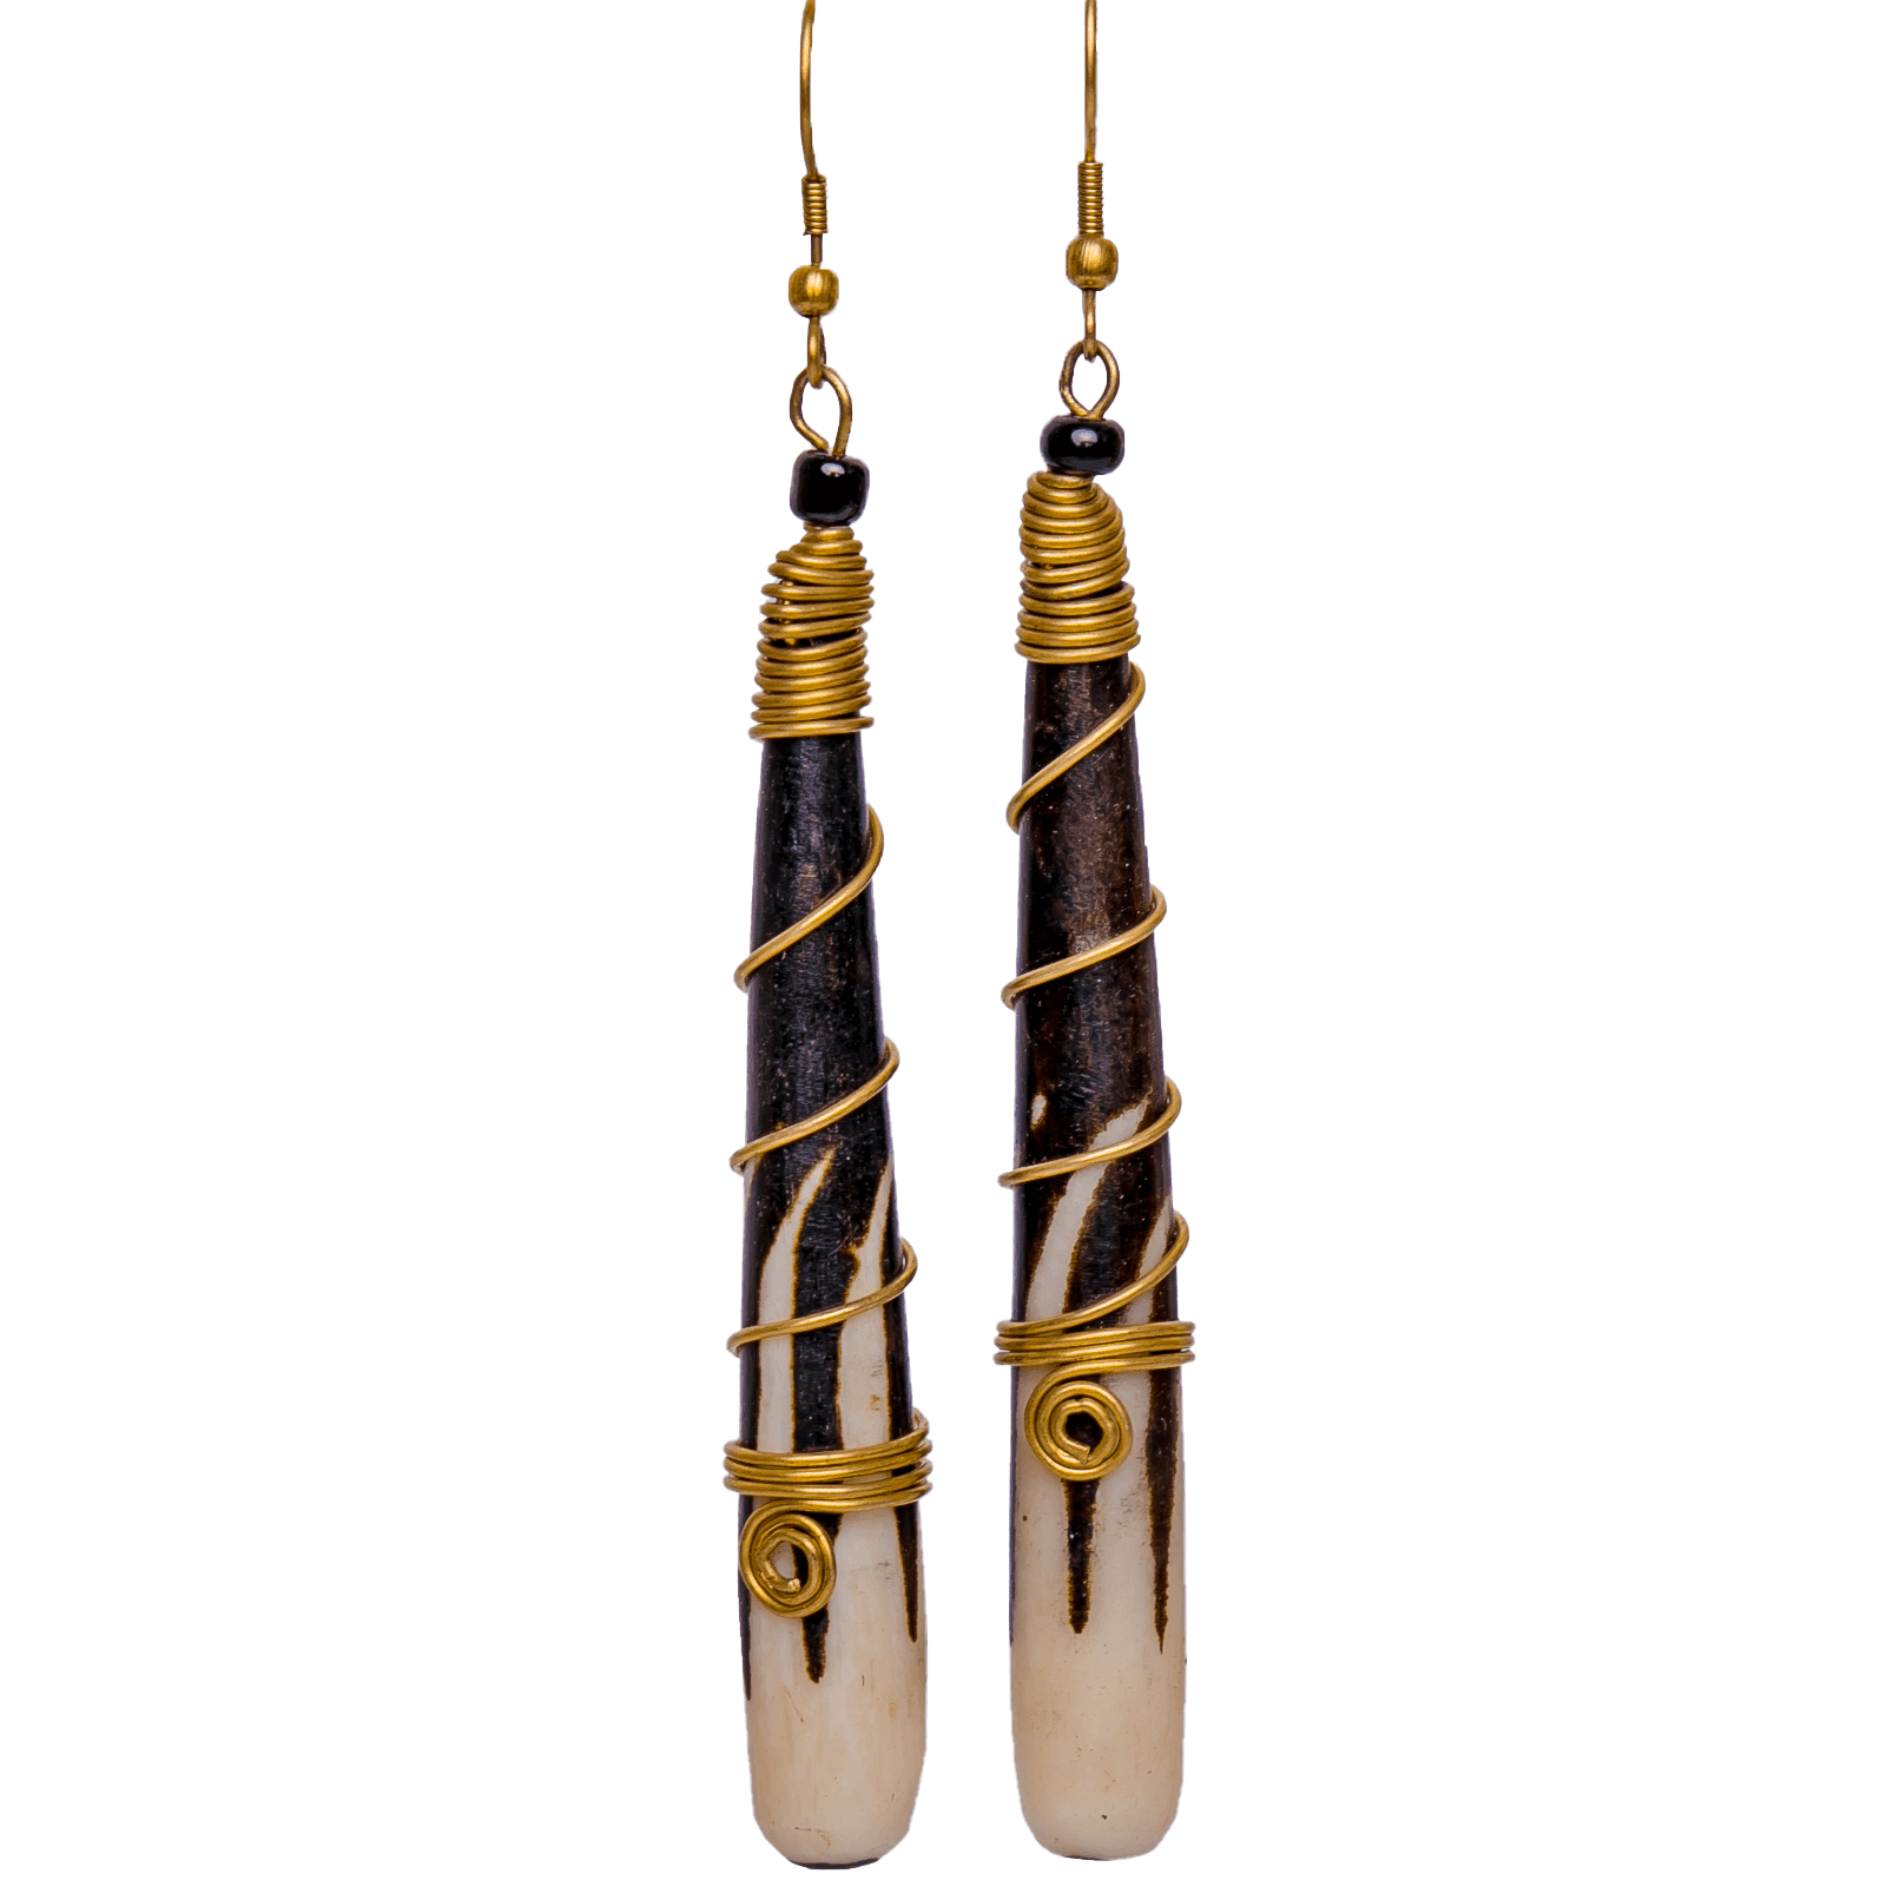 White and black long bar earrings wrapped with gold plated brass